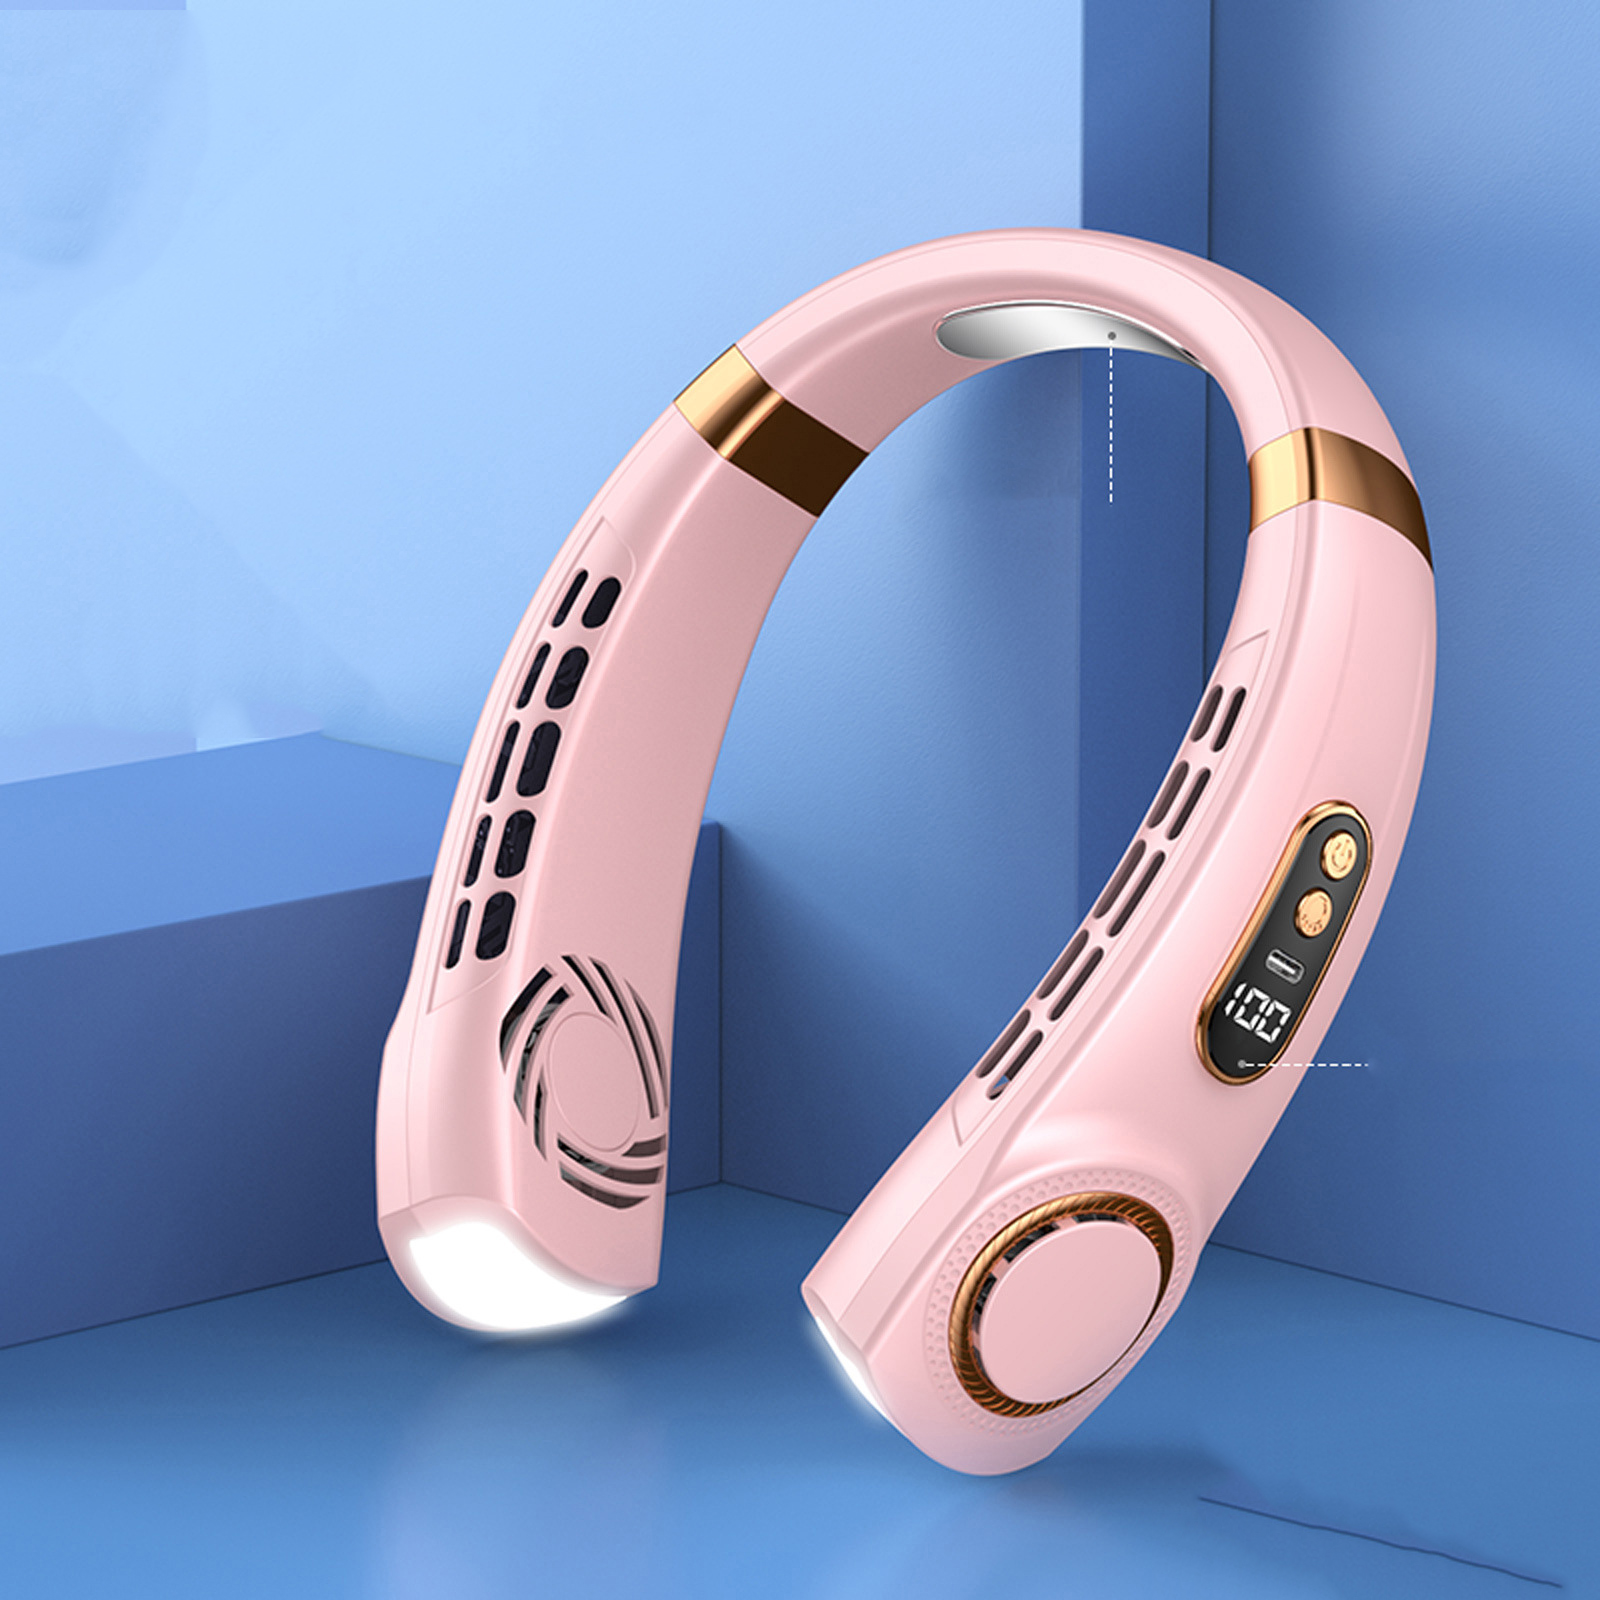 [Top with pink] Typc charging   long life   real-time power display   colorful atmosphere breathing light